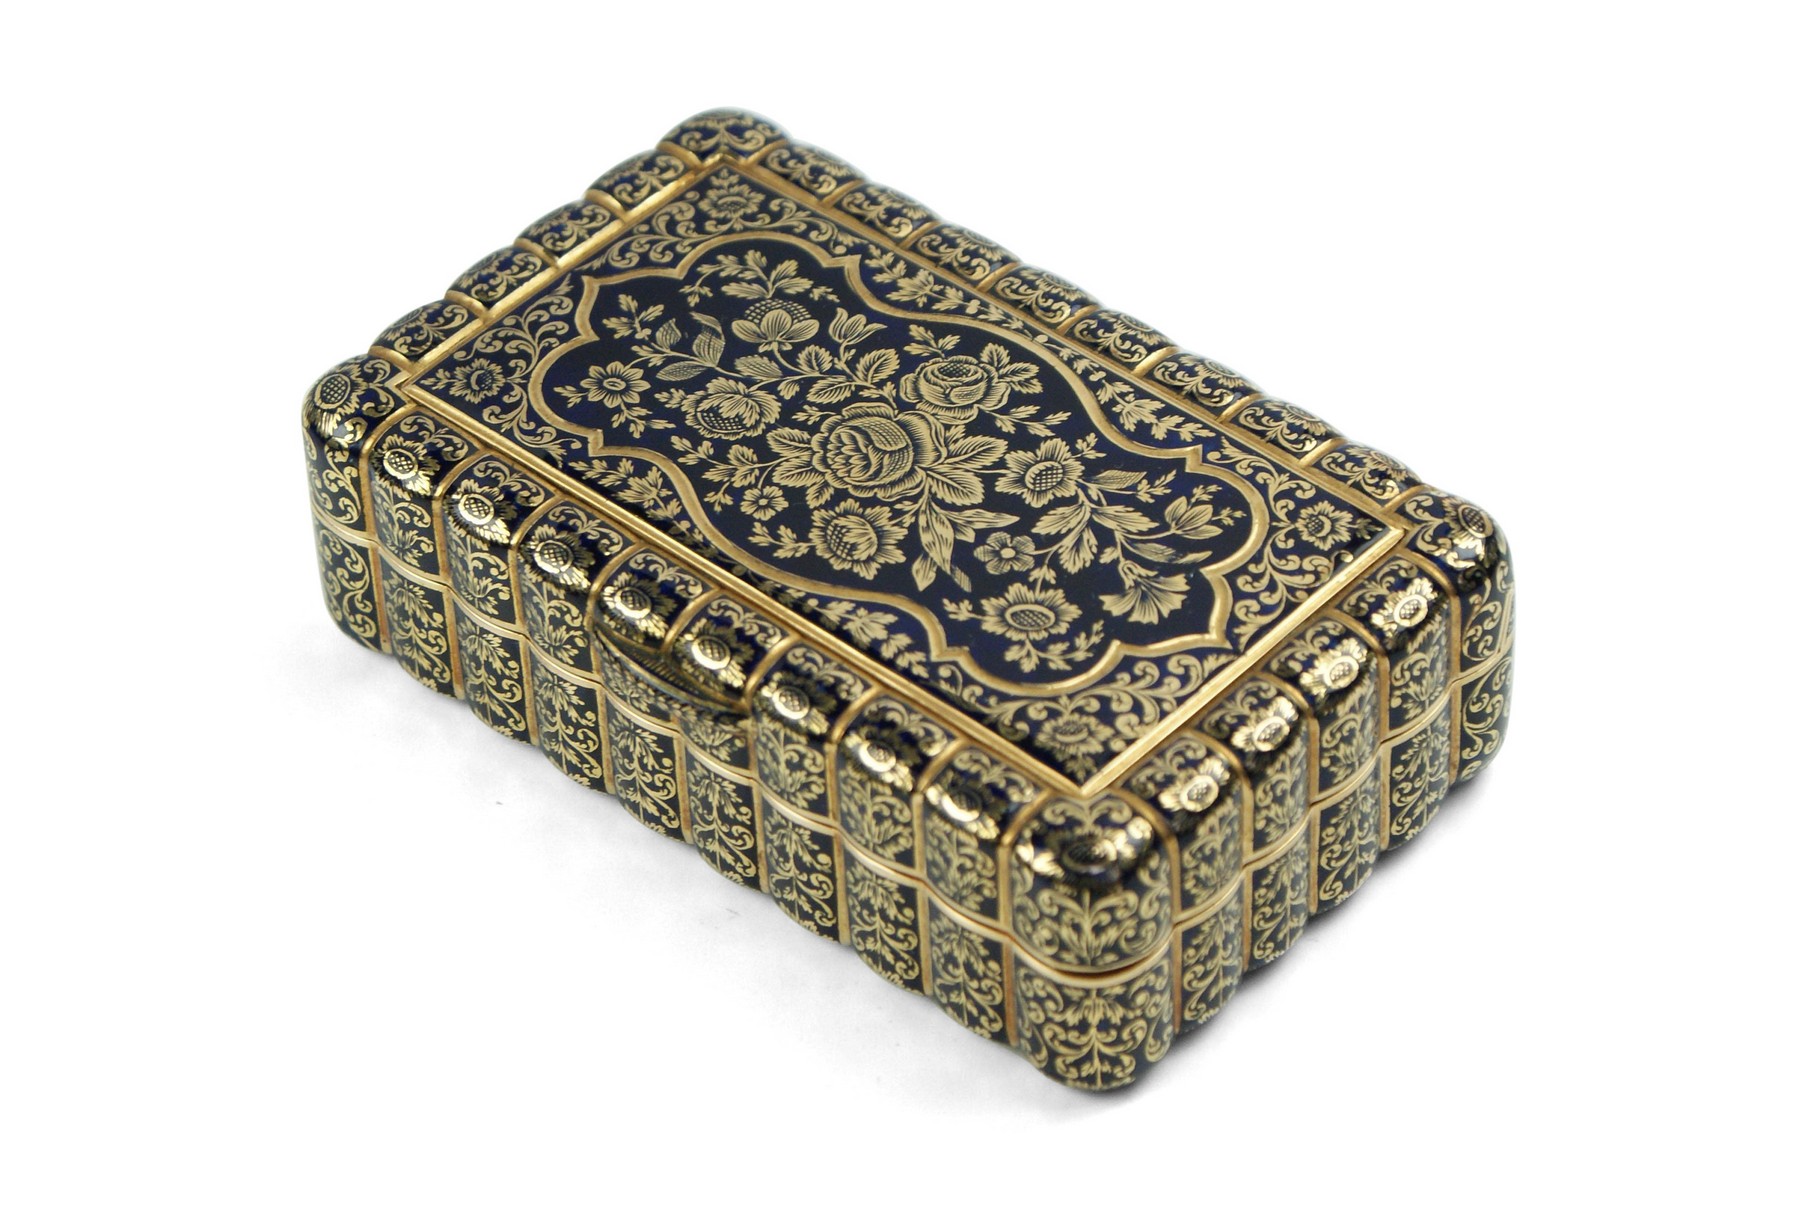 Swiss Gold and enamel Box - Image 2 of 2